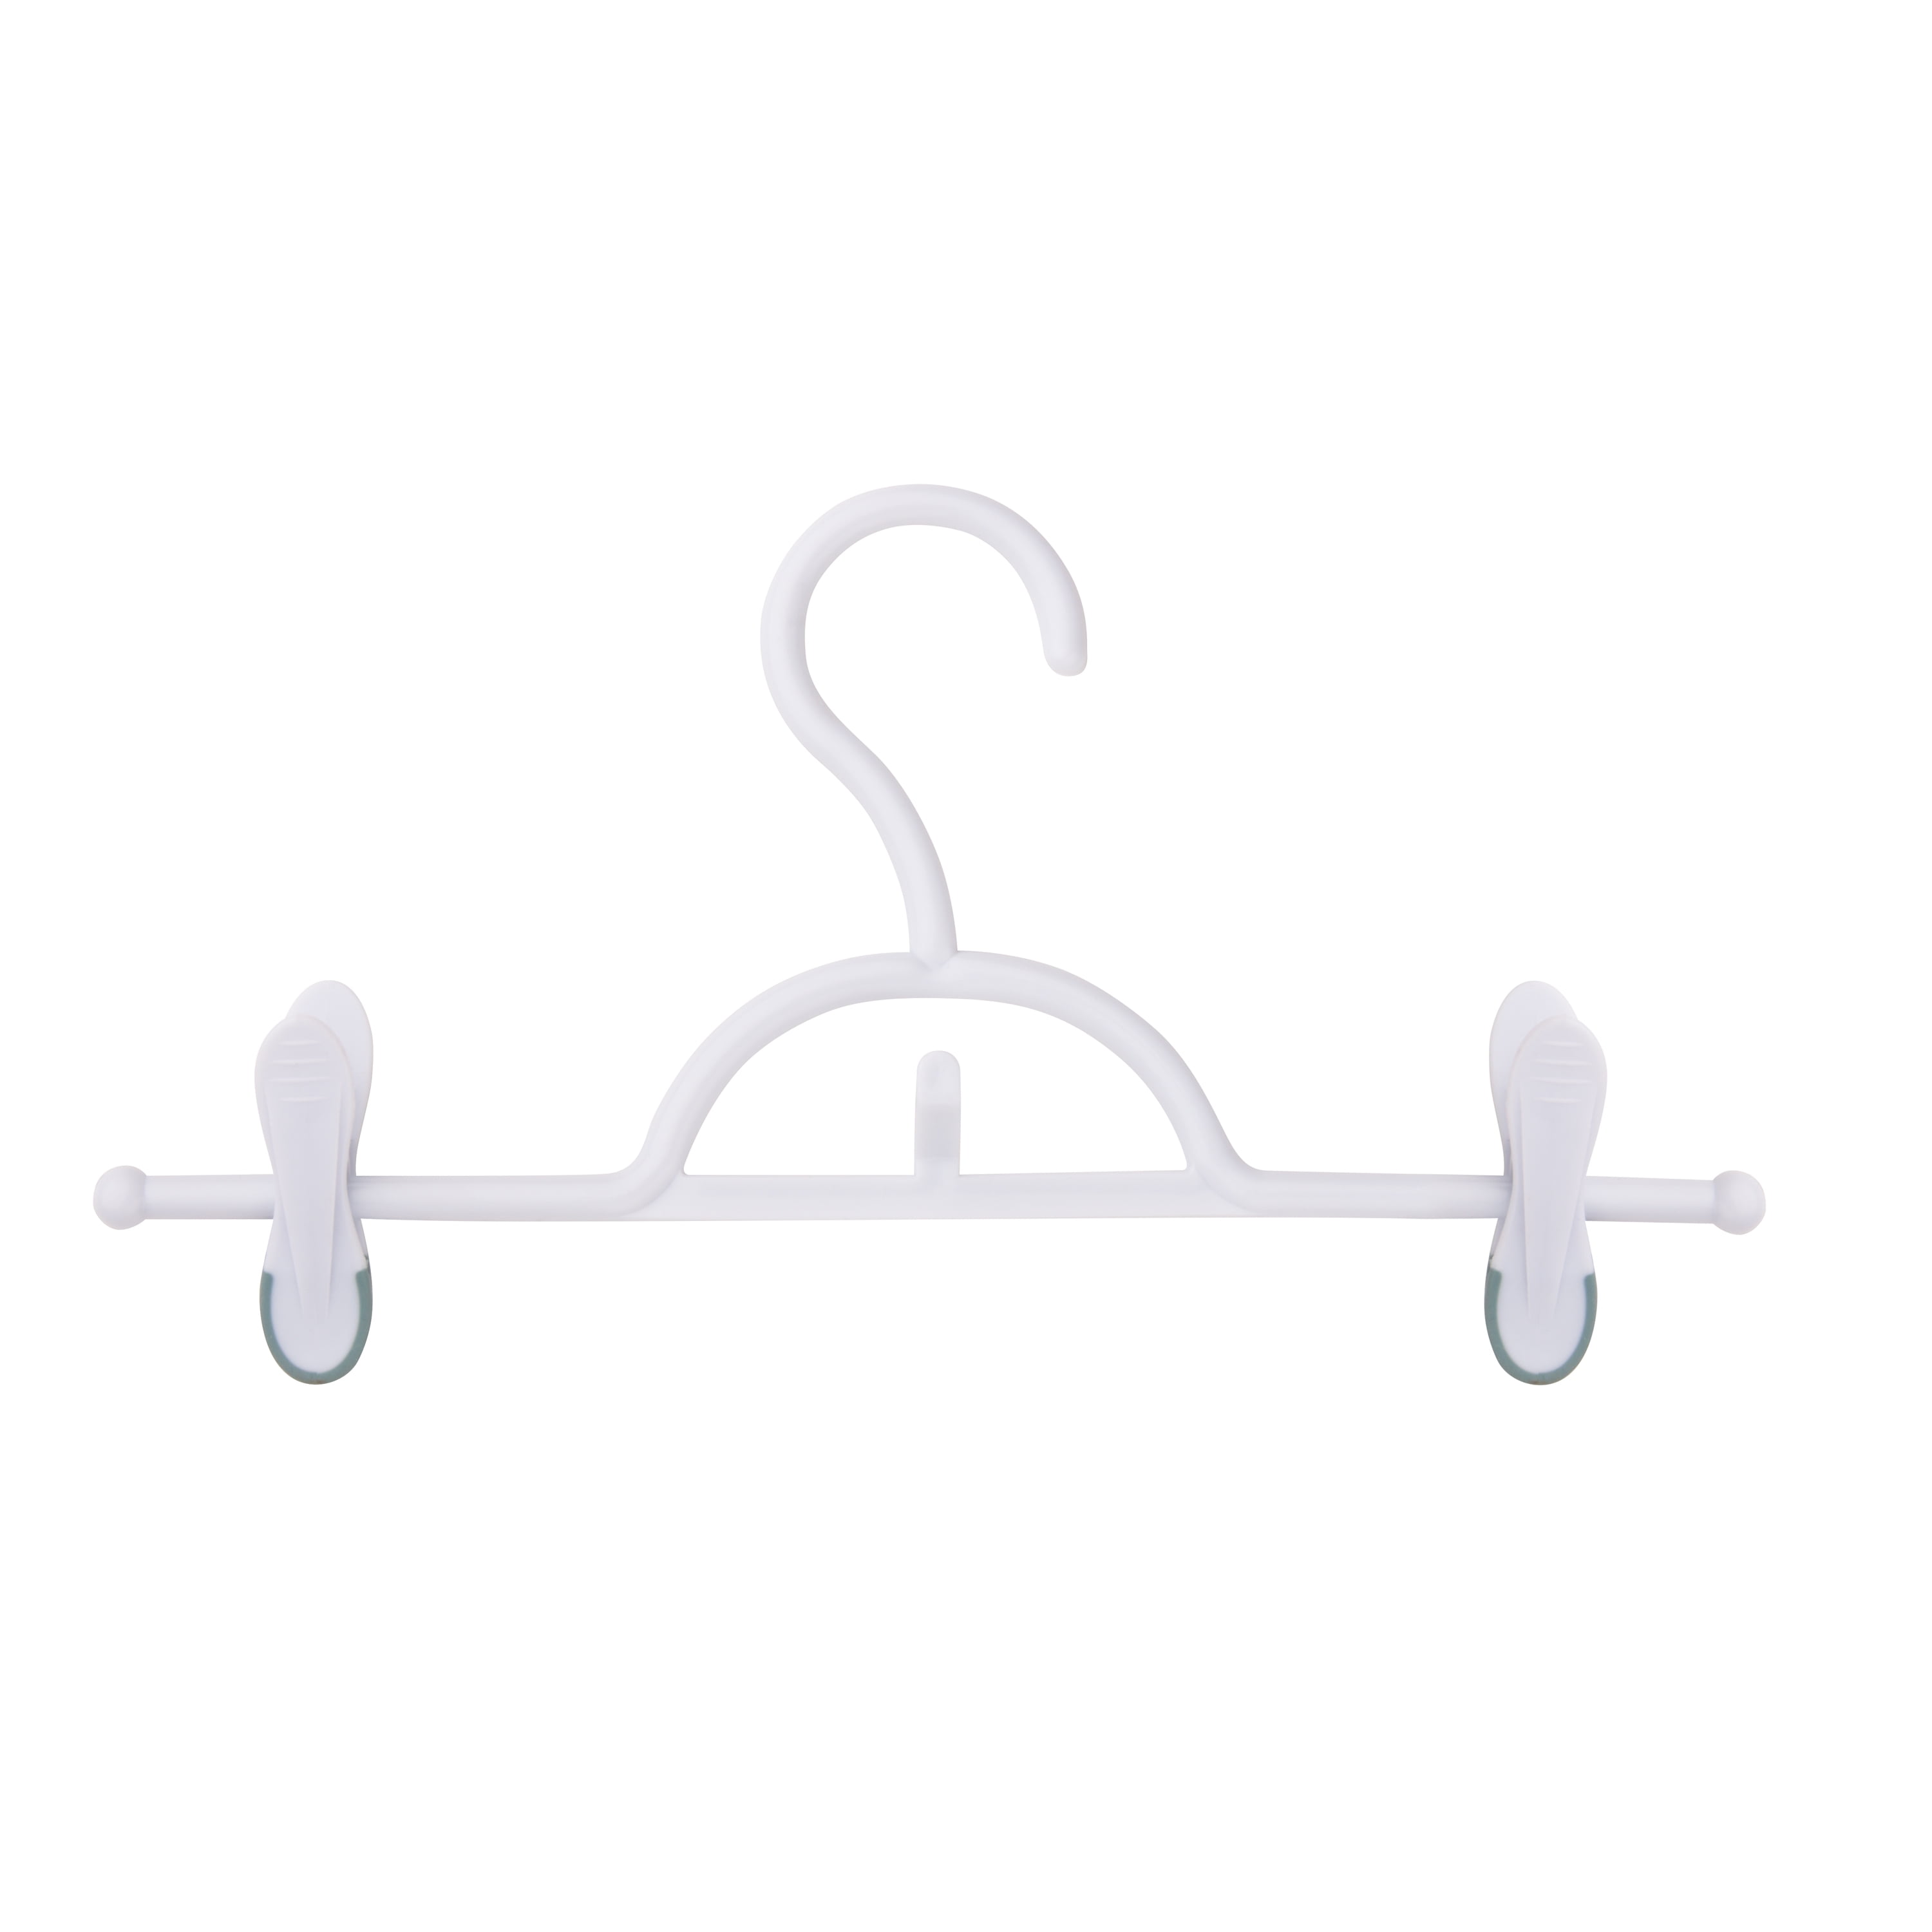 Ideal for Lightweight Garments Honey-Can-Do HNGT01322 Soft Touch Skirt/Pant Hanger with Clips 12-Pack 